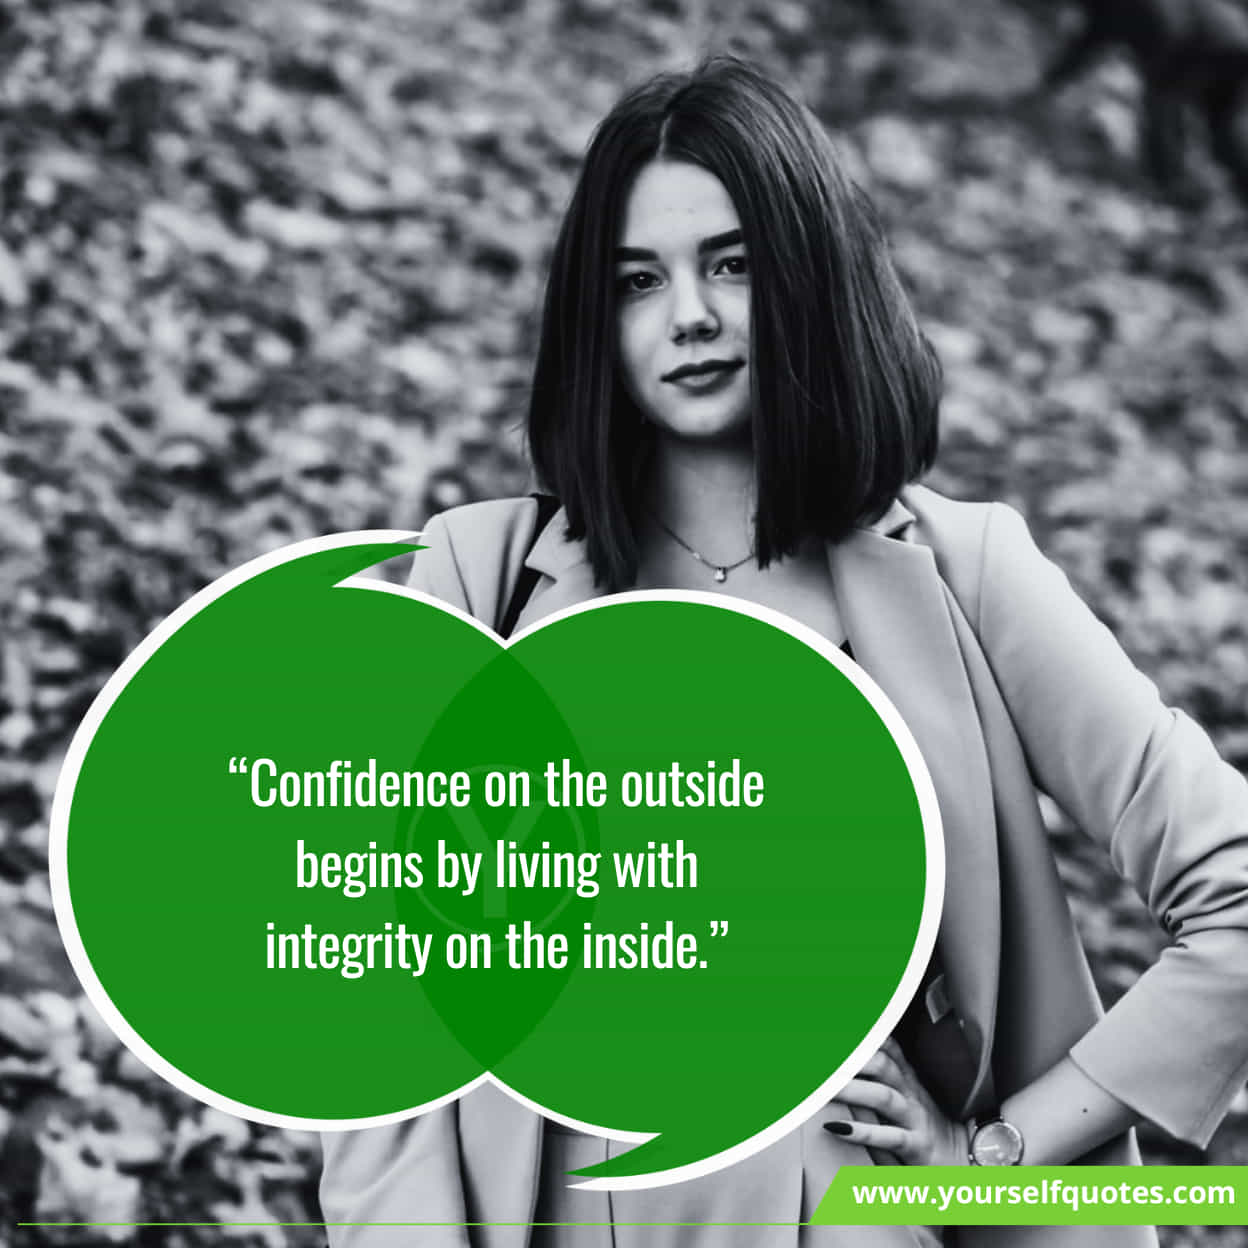 Inspiring Quotes On Self Confidence